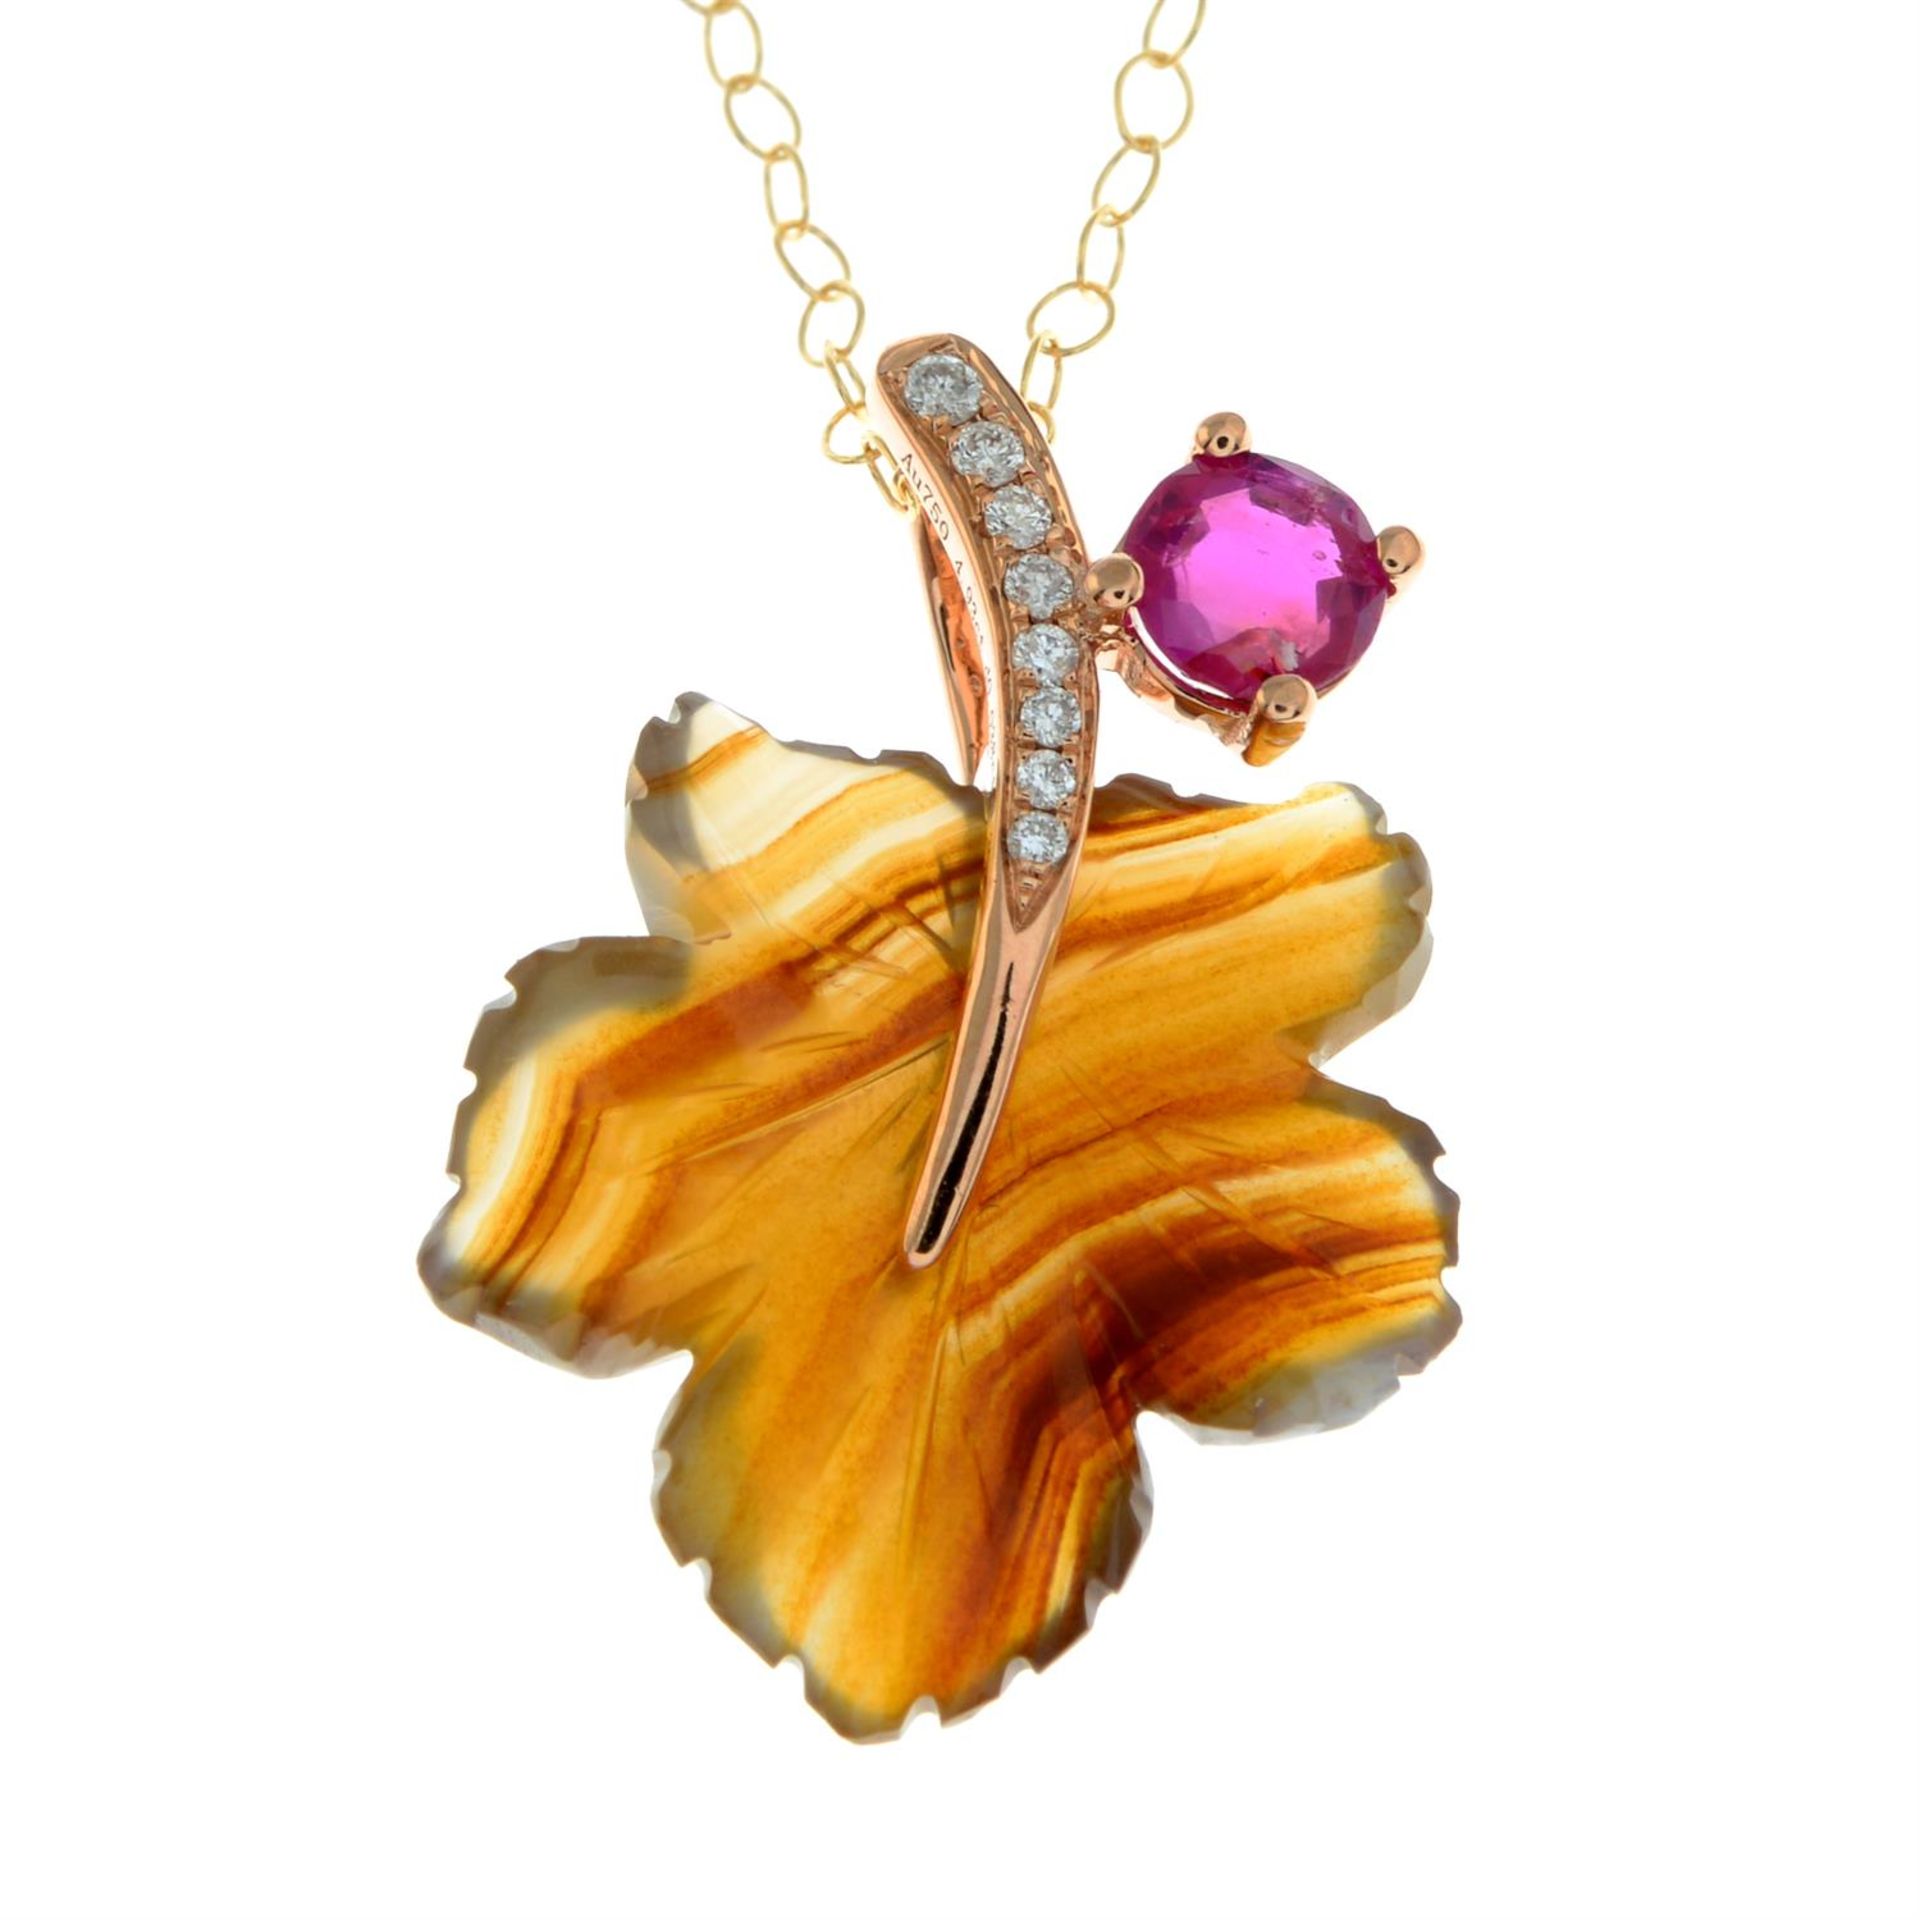 A carved foliate agate pendant, with diamond stem and ruby bud, with chain. - Image 2 of 5